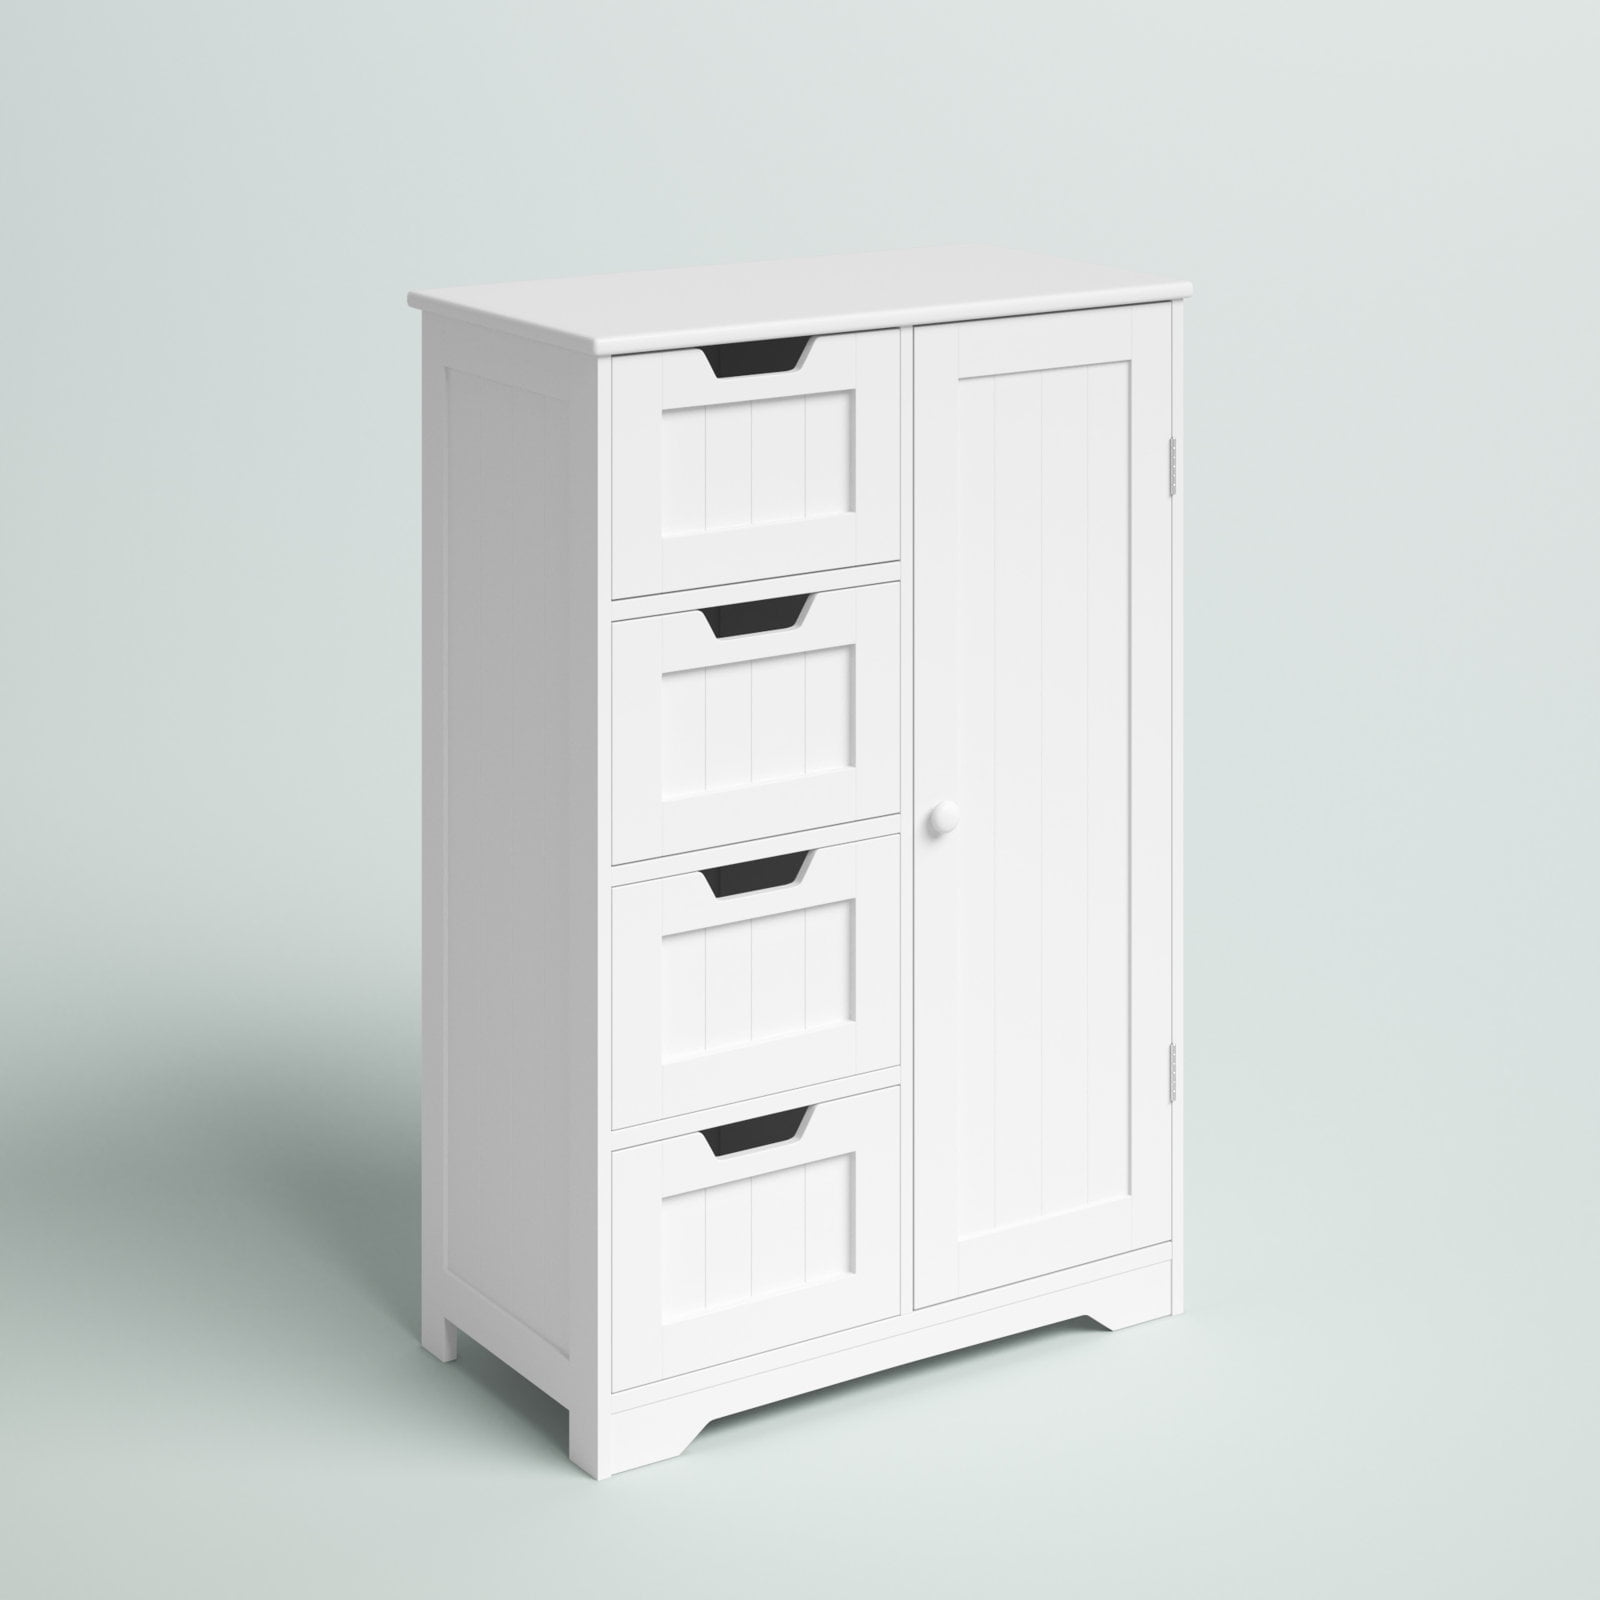 Homfa 4 Drawer Storage Cabinet, Modern Wooden Cupboard with Frosted GL